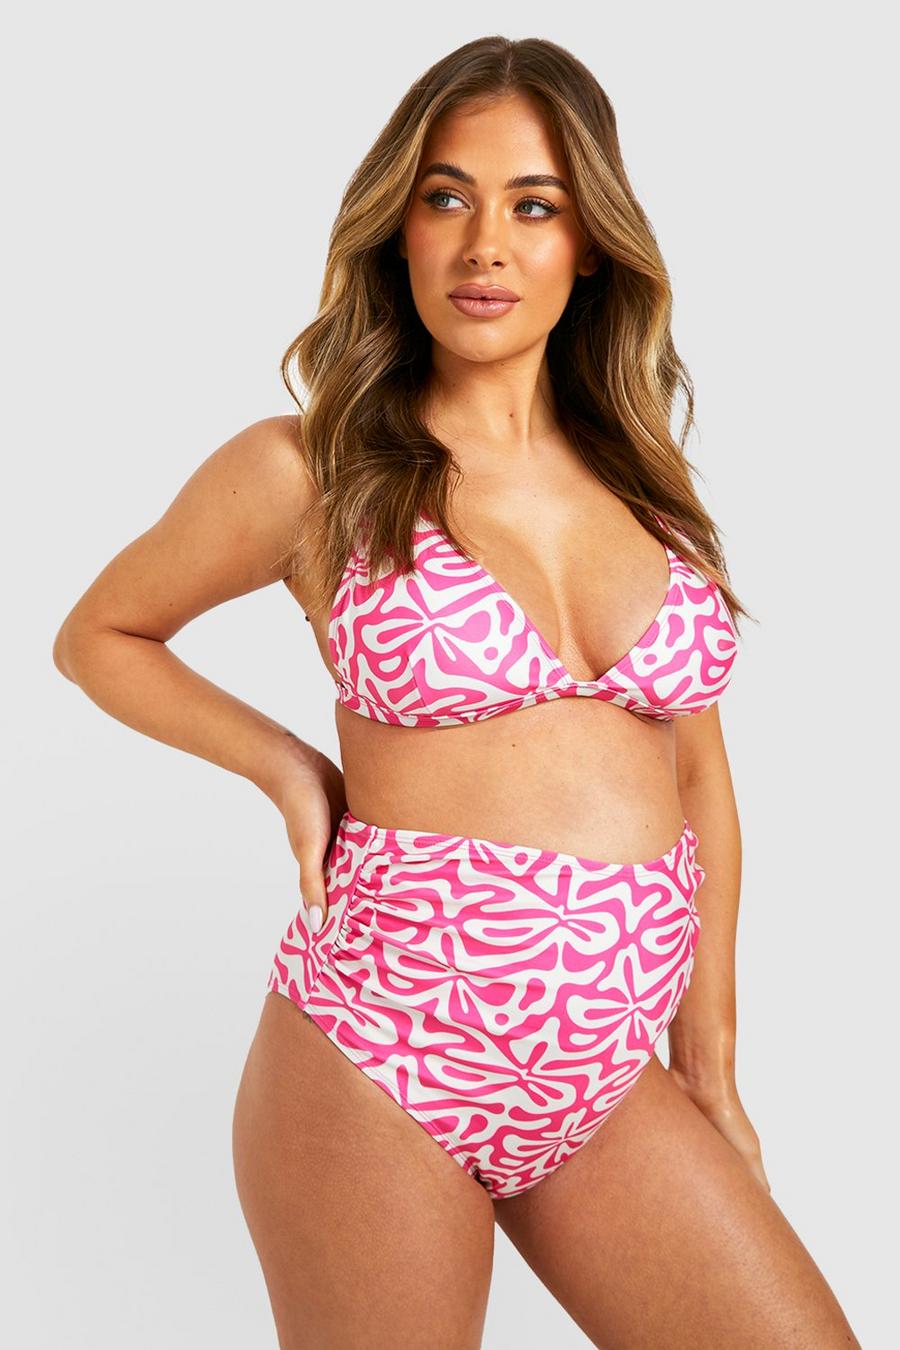 Maternity-swimsuit with 70% discount!